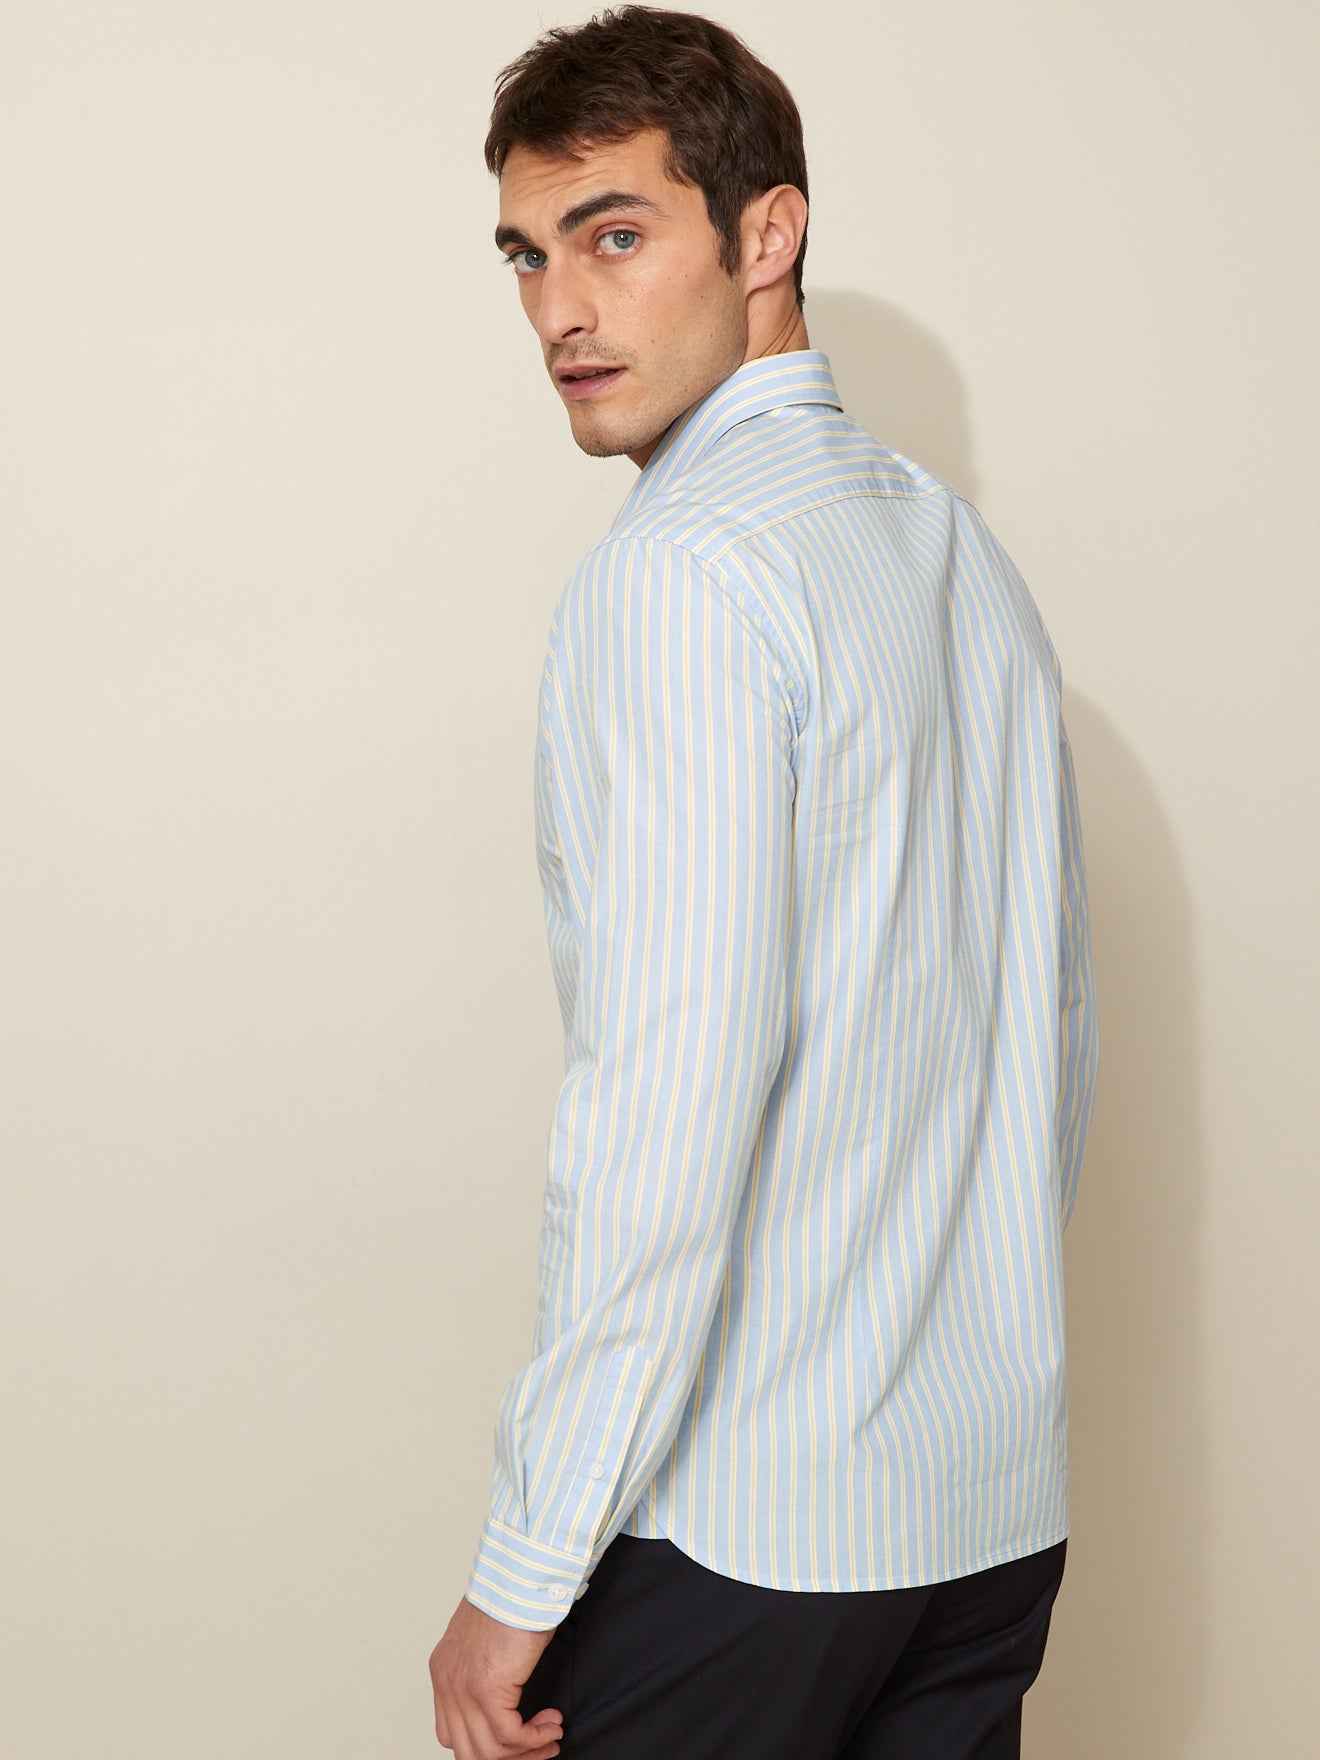 Chemise rayures tricolores Slim Fit homme